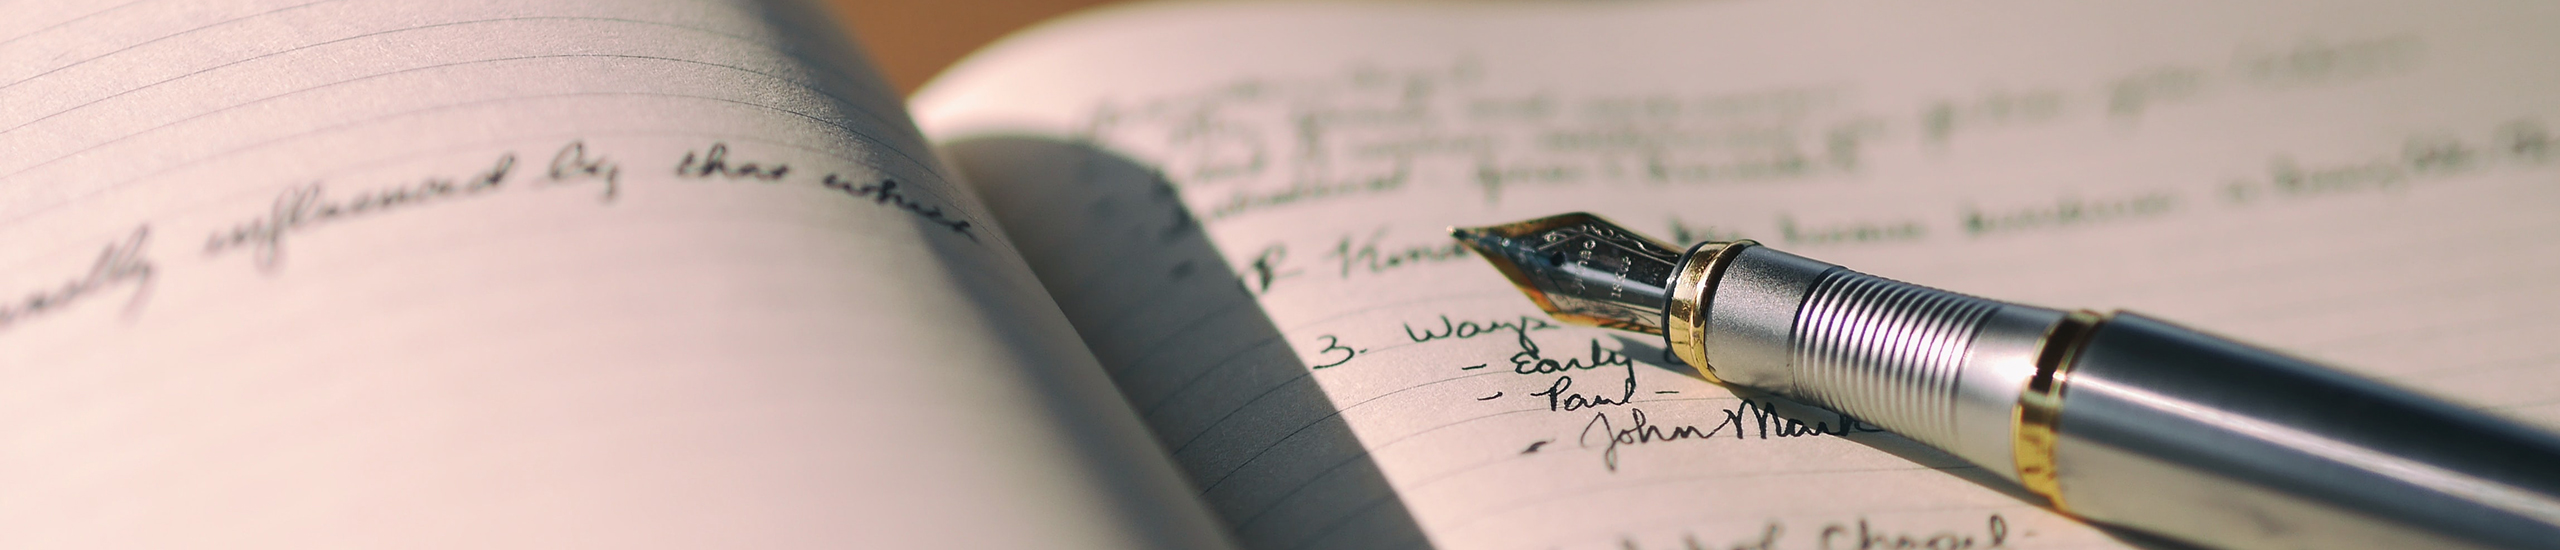 A fountain pen rests on a journal.